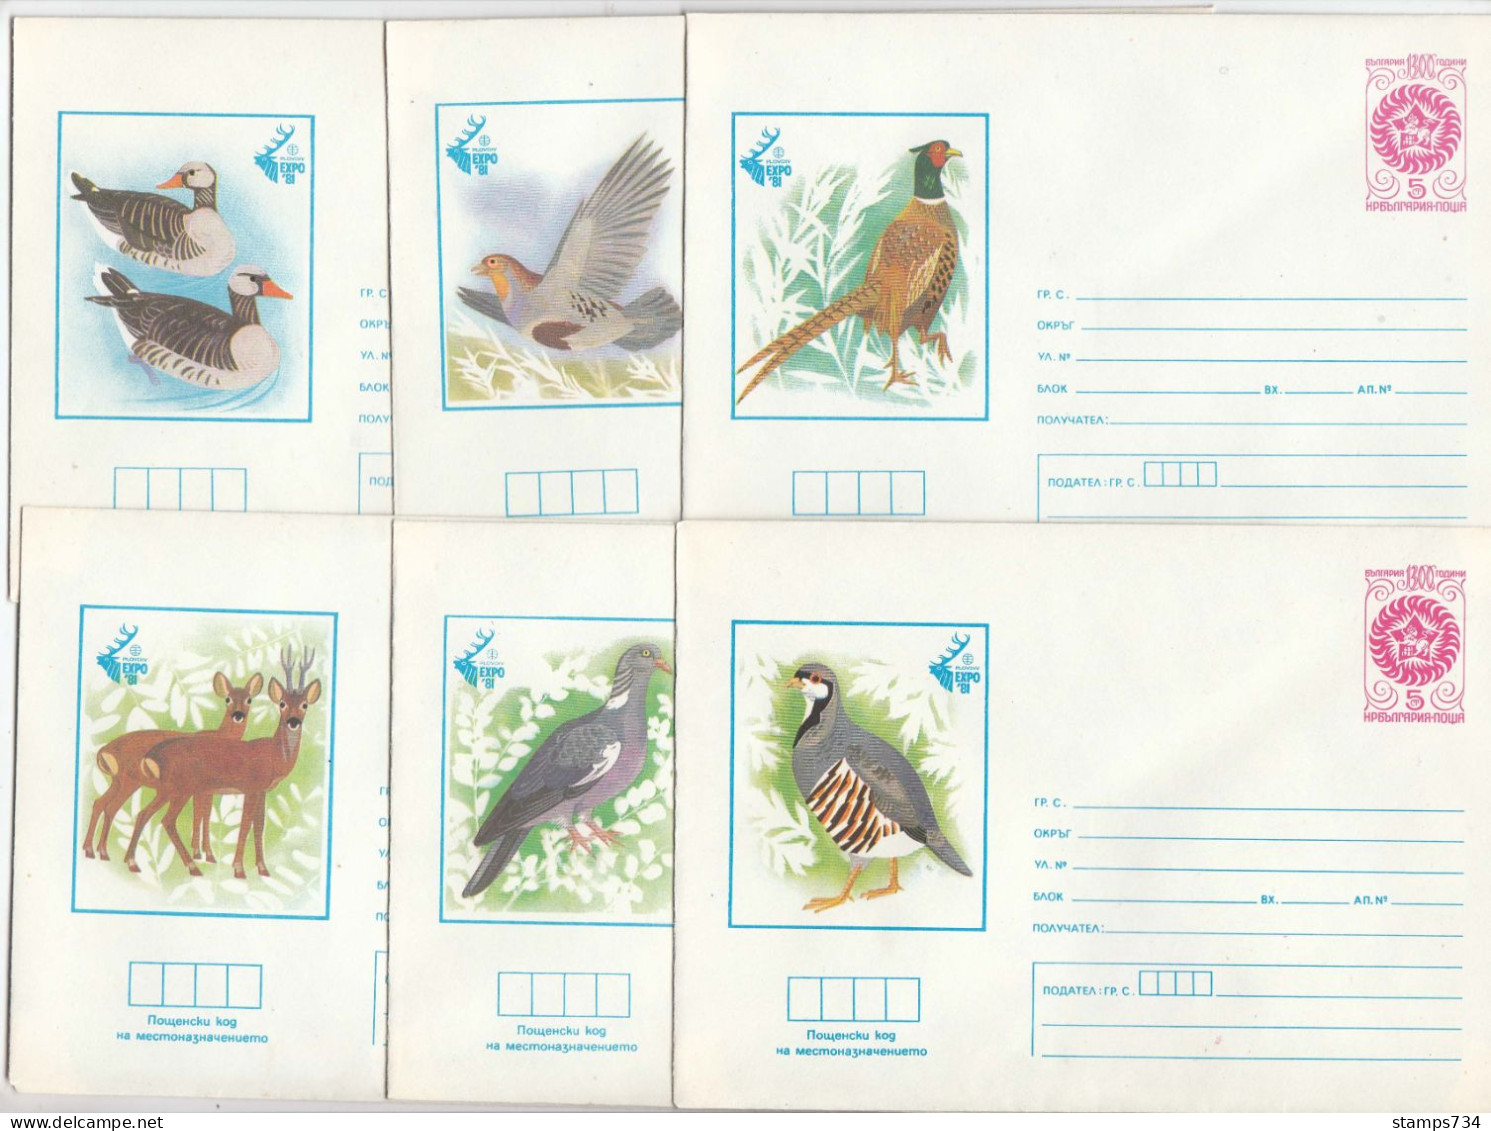 PS 771/1981 - Mint, ЕXPO'81: Hunting Animals, Full Complete Ot 27 Covers, Post. Stationery - Bulgaria(5 Scan) - Covers